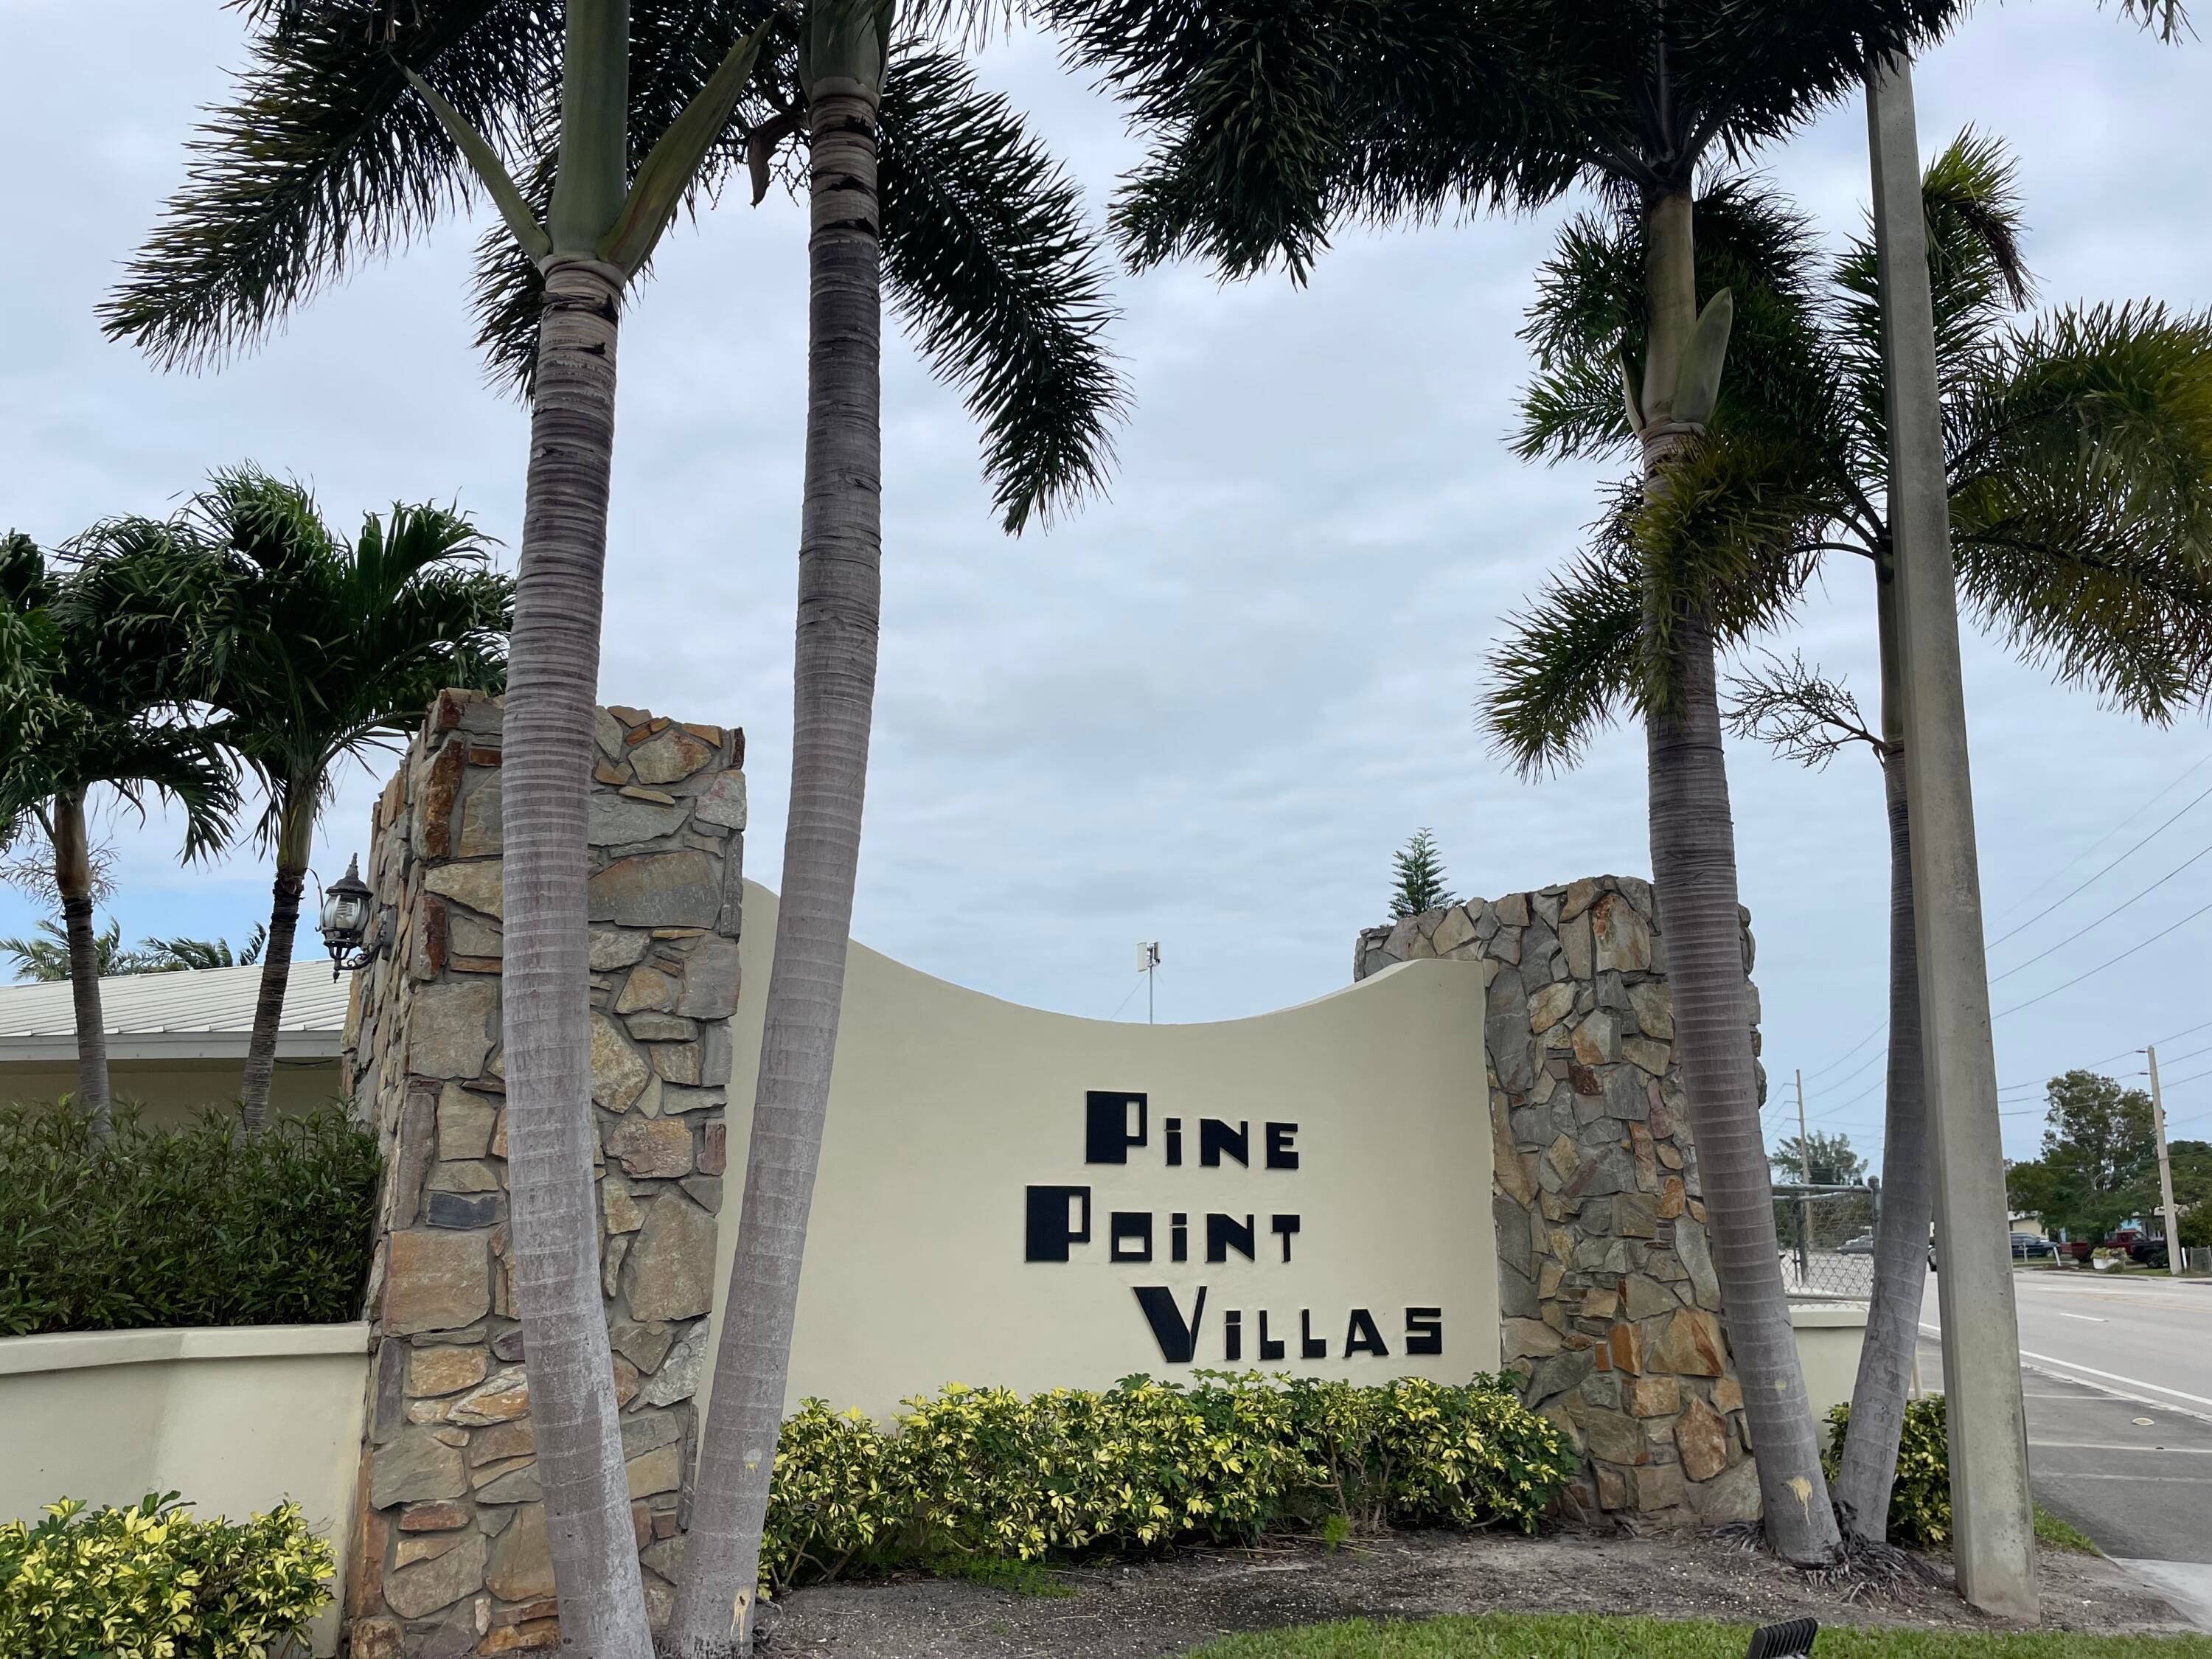 Discover this hidden little gem that could be your perfect home in Boynton Beach's Pine Point Villas subdivision with this charming unit, it can be turnkey or put all your ...